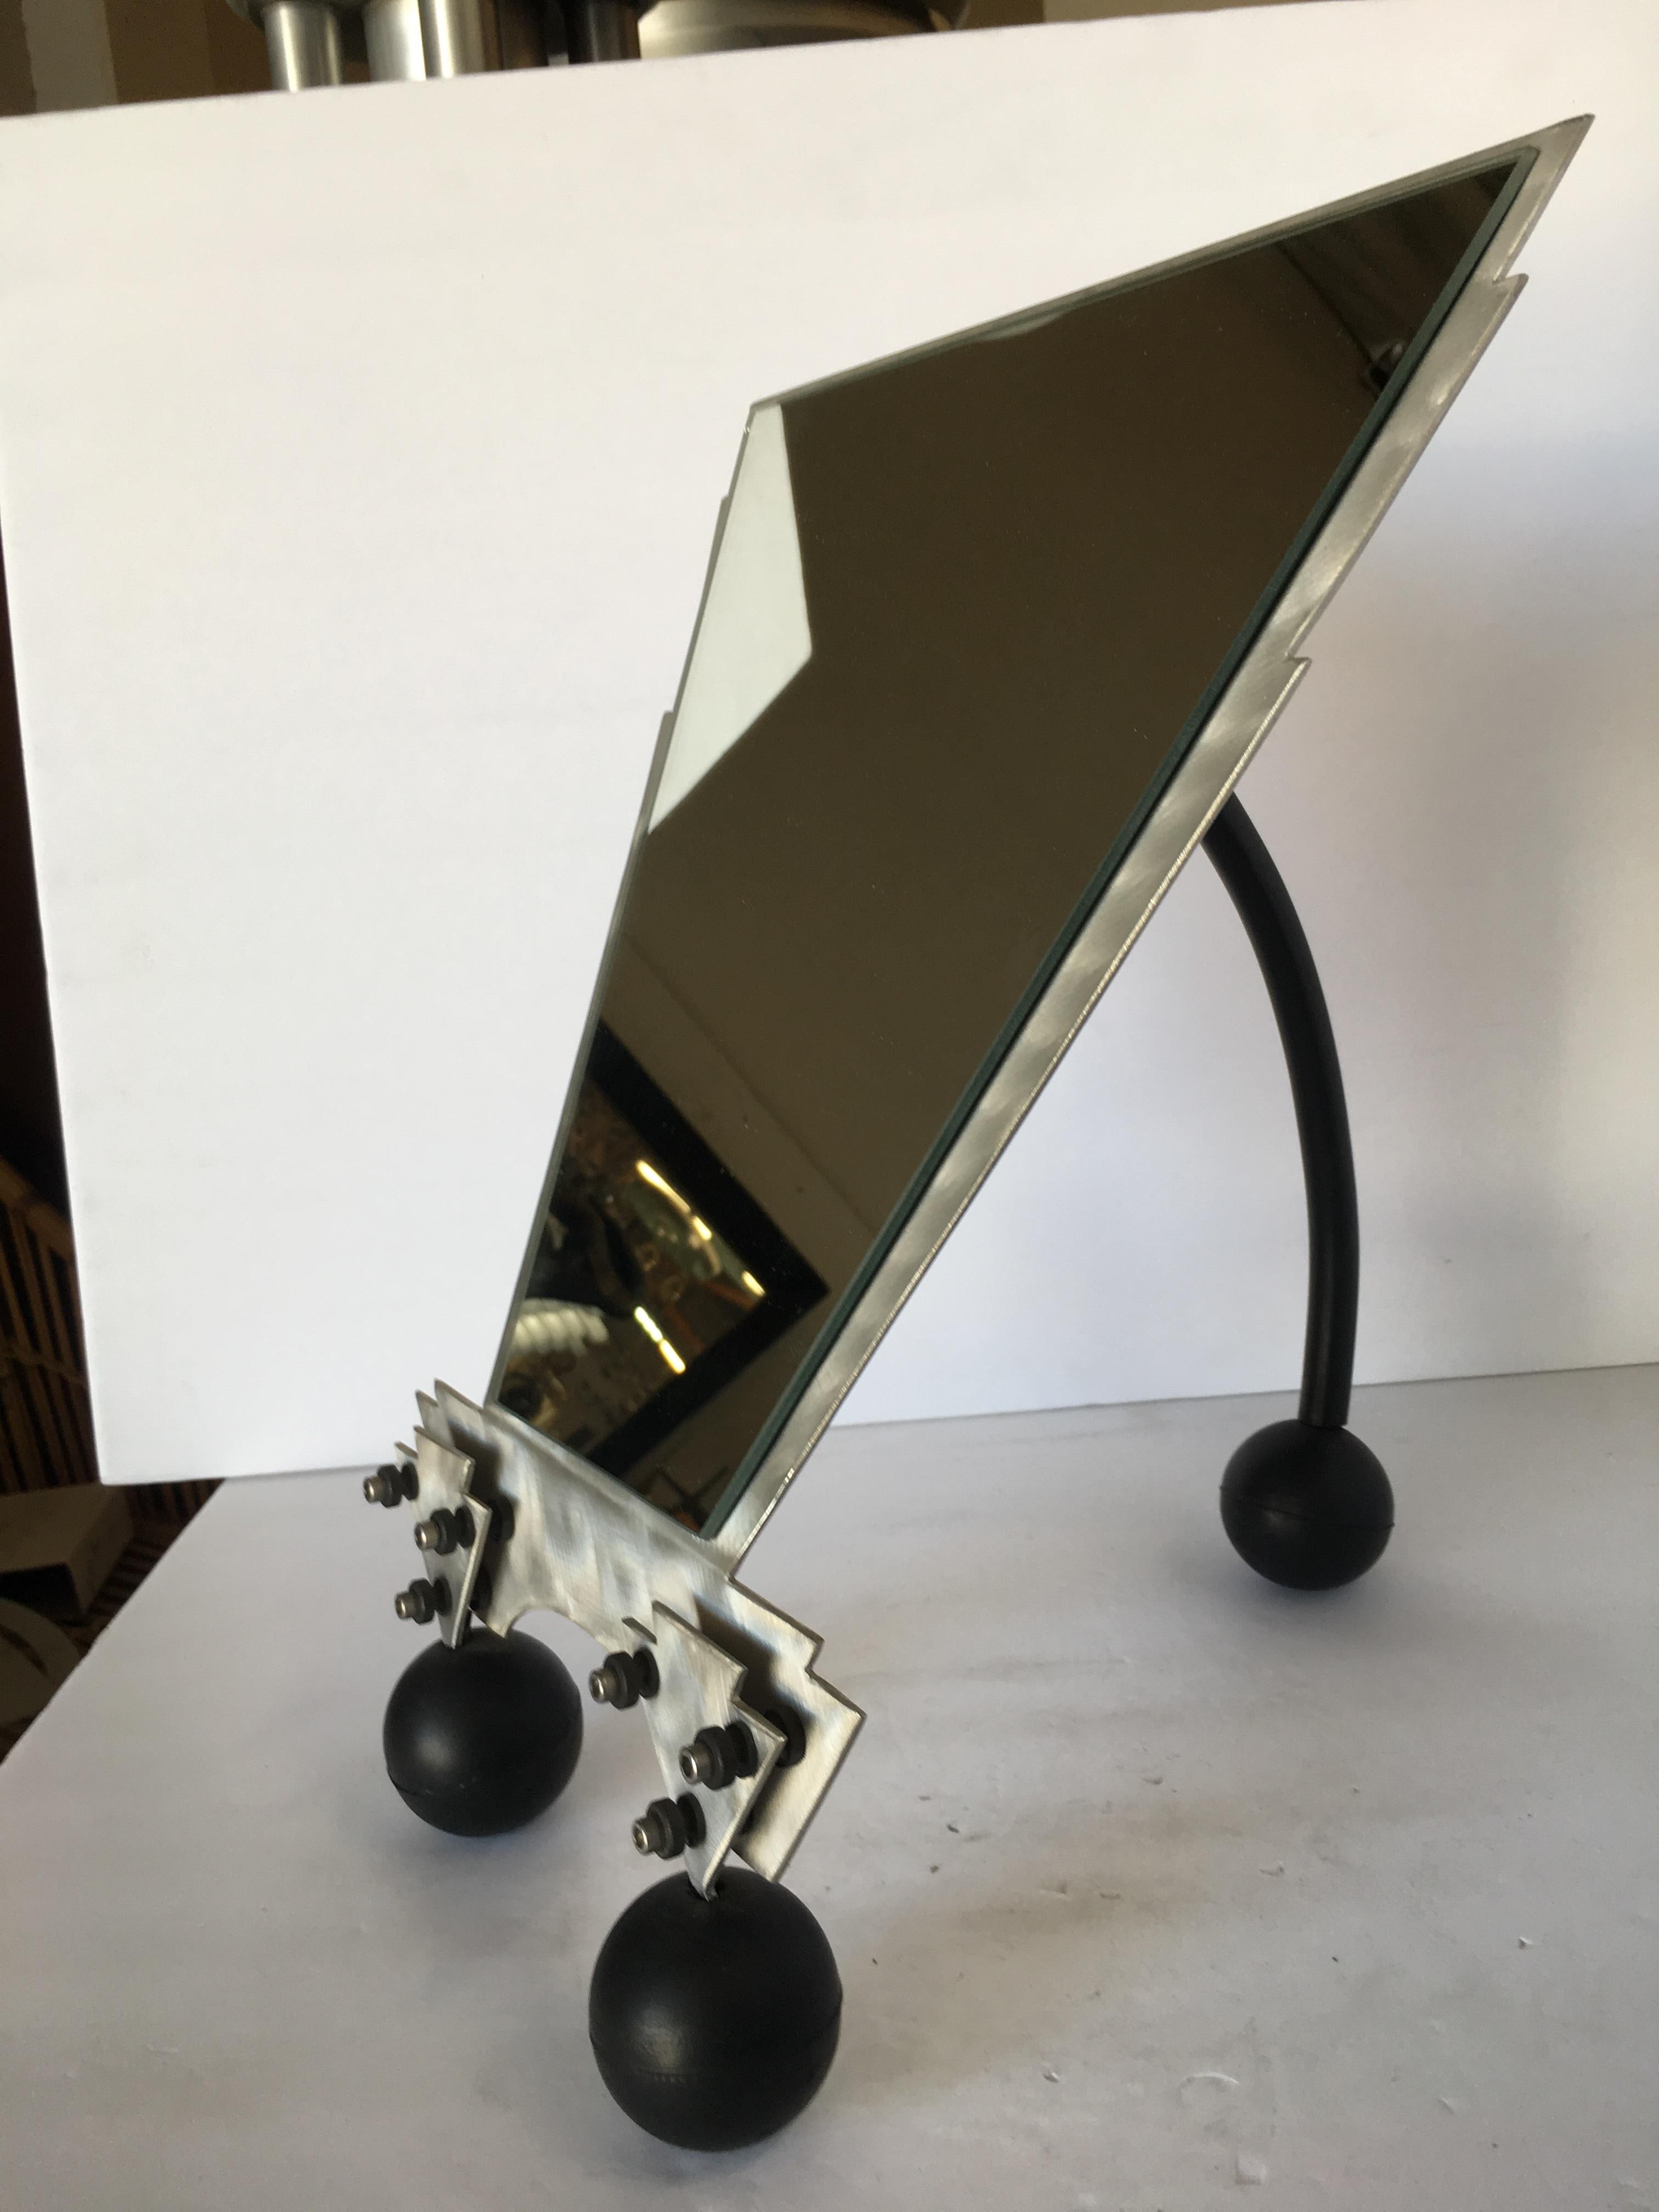 Custom Memphis Style Machined Metal Table Top Vanity Mirror In Excellent Condition For Sale In Van Nuys, CA